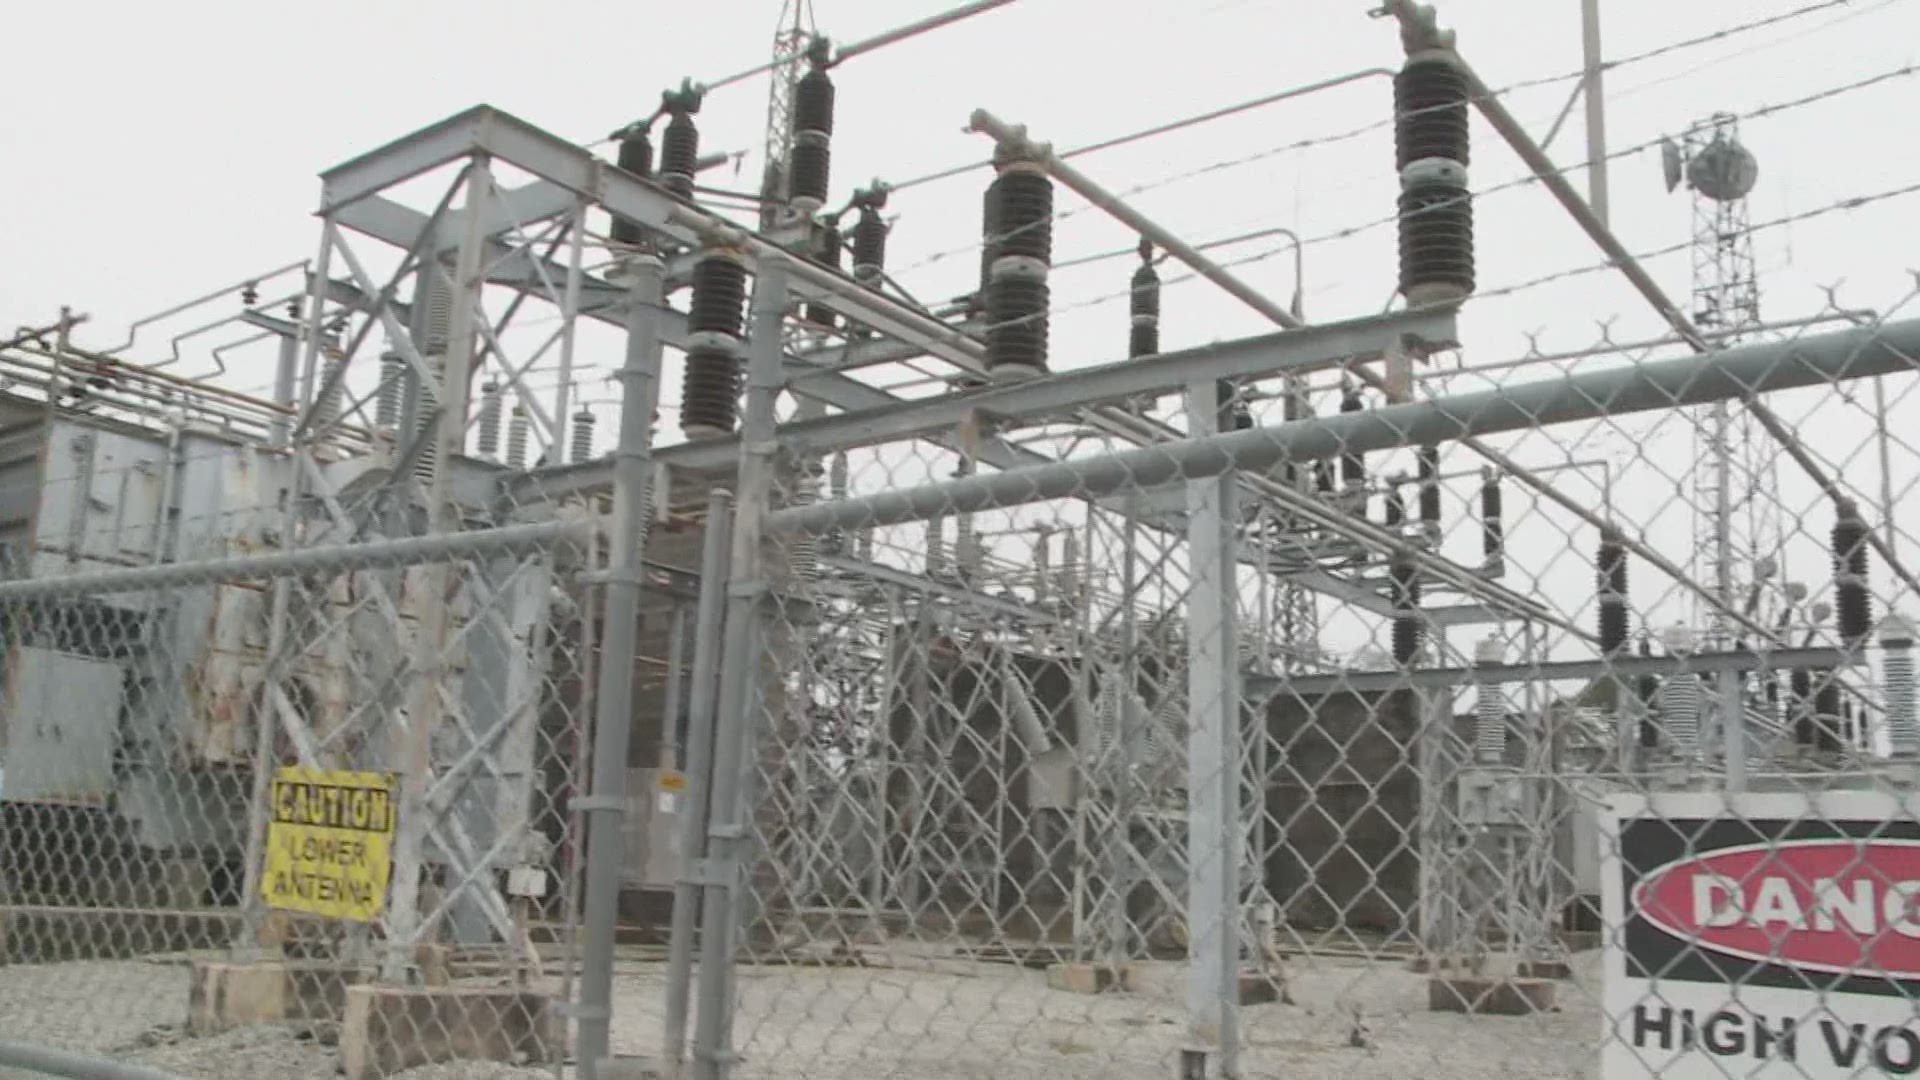 Entergy said that power was cut to 3 times as many customers as was necessary last week during the rolling blackouts. That didn't sit well with council members.